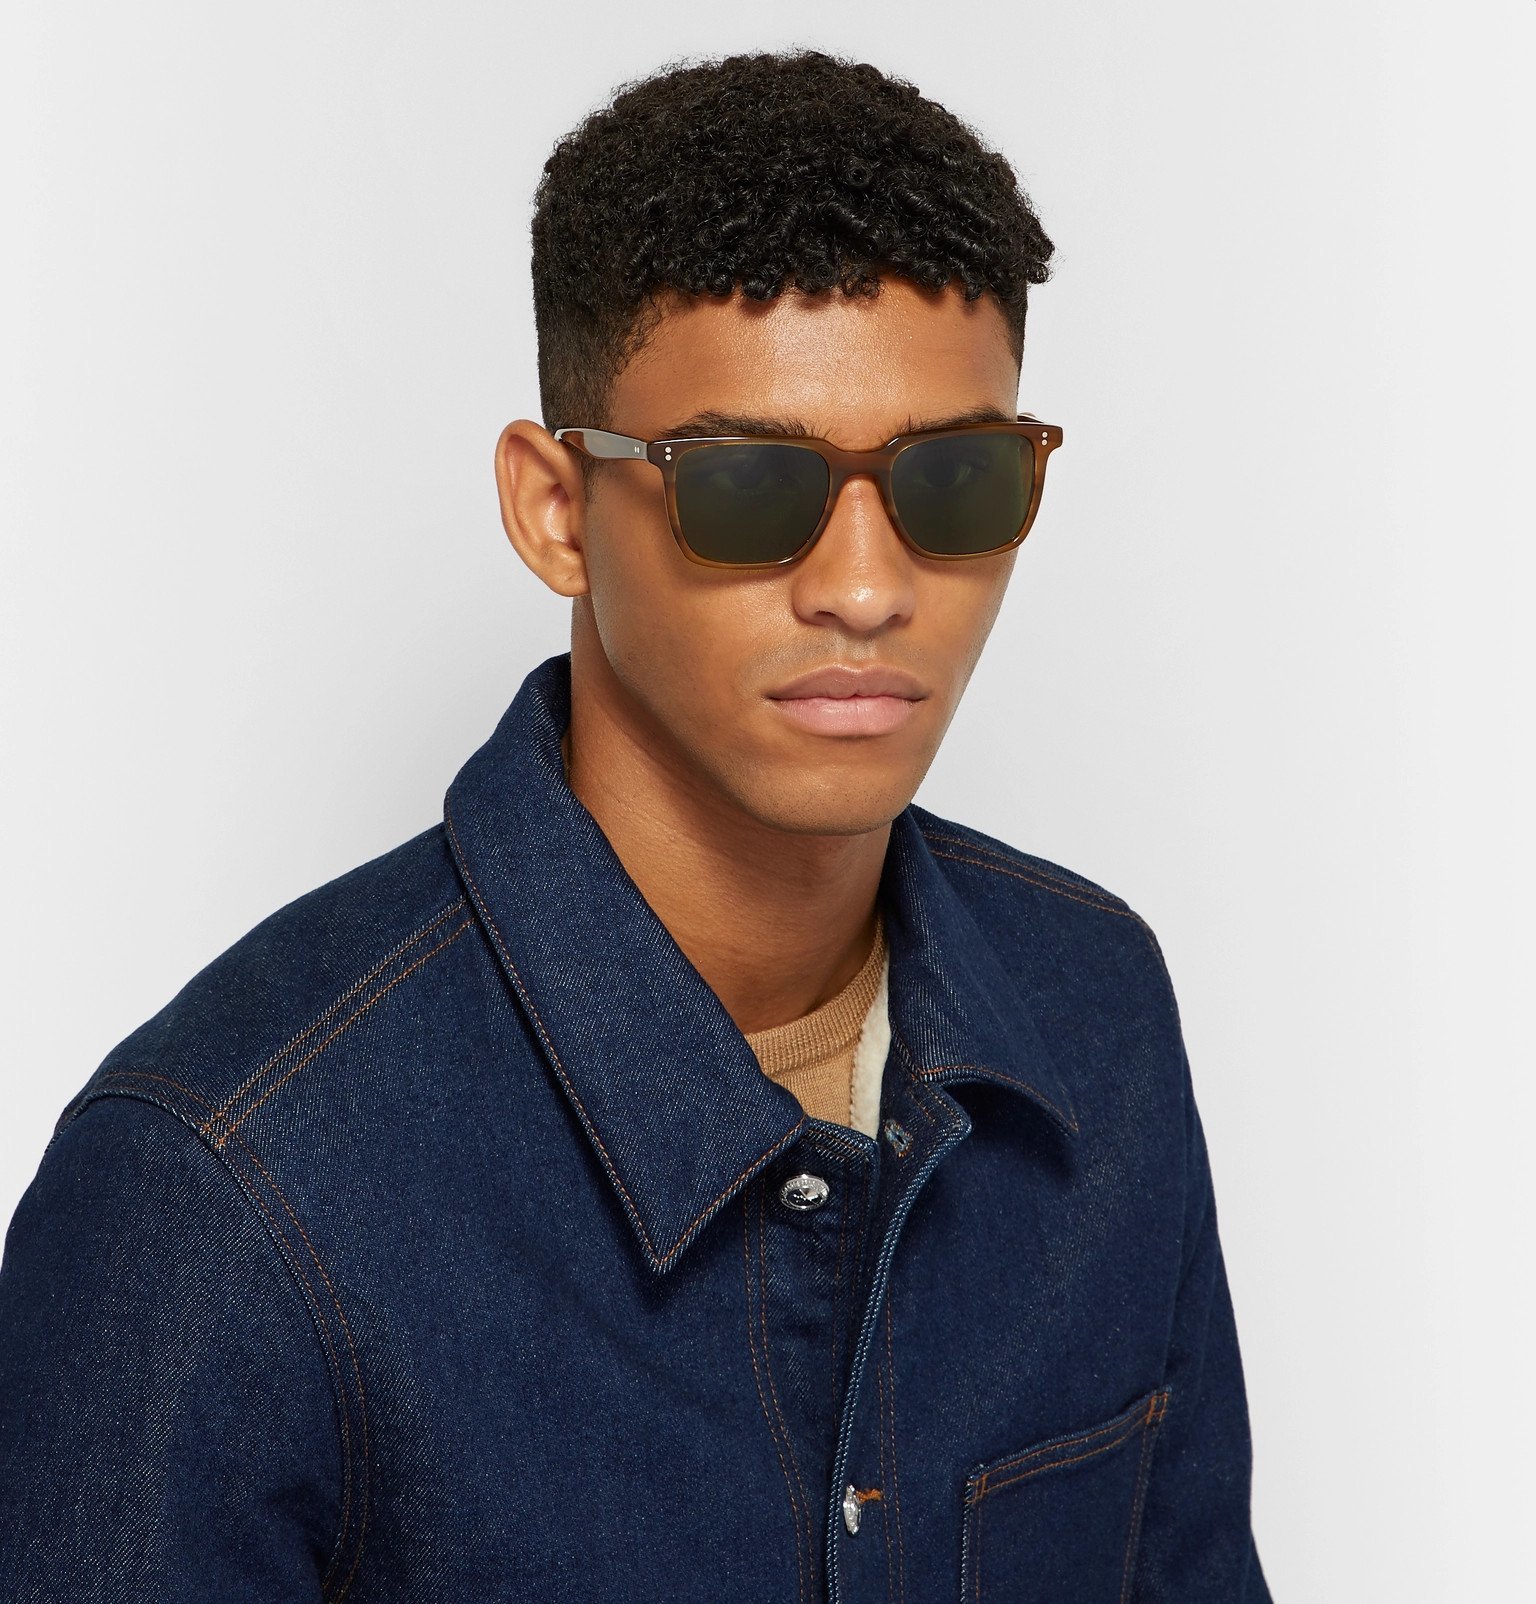 Oliver Peoples - Lachman Square-Frame Acetate Sunglasses - Tortoiseshell Oliver  Peoples